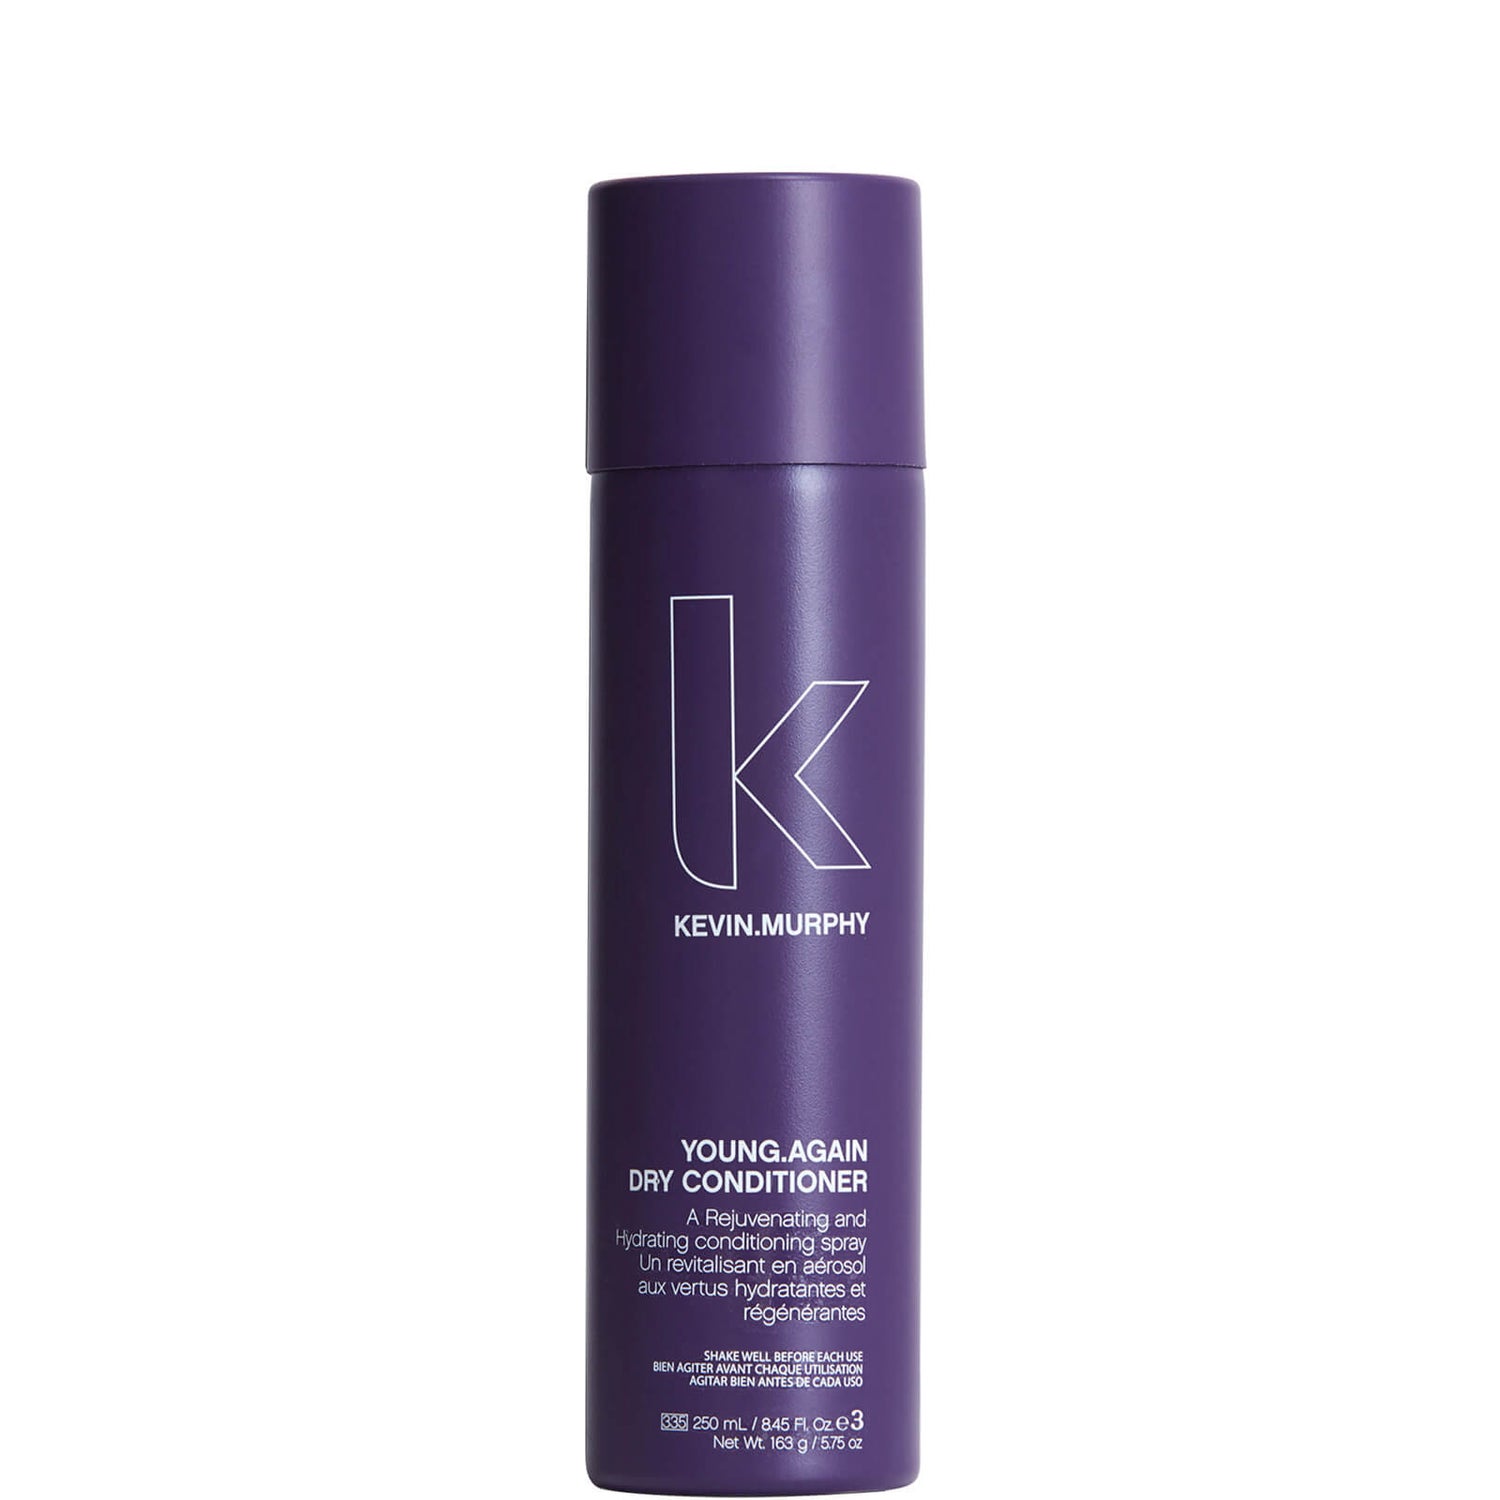 KEVIN.MURPHY Young.Again Dry Conditioner